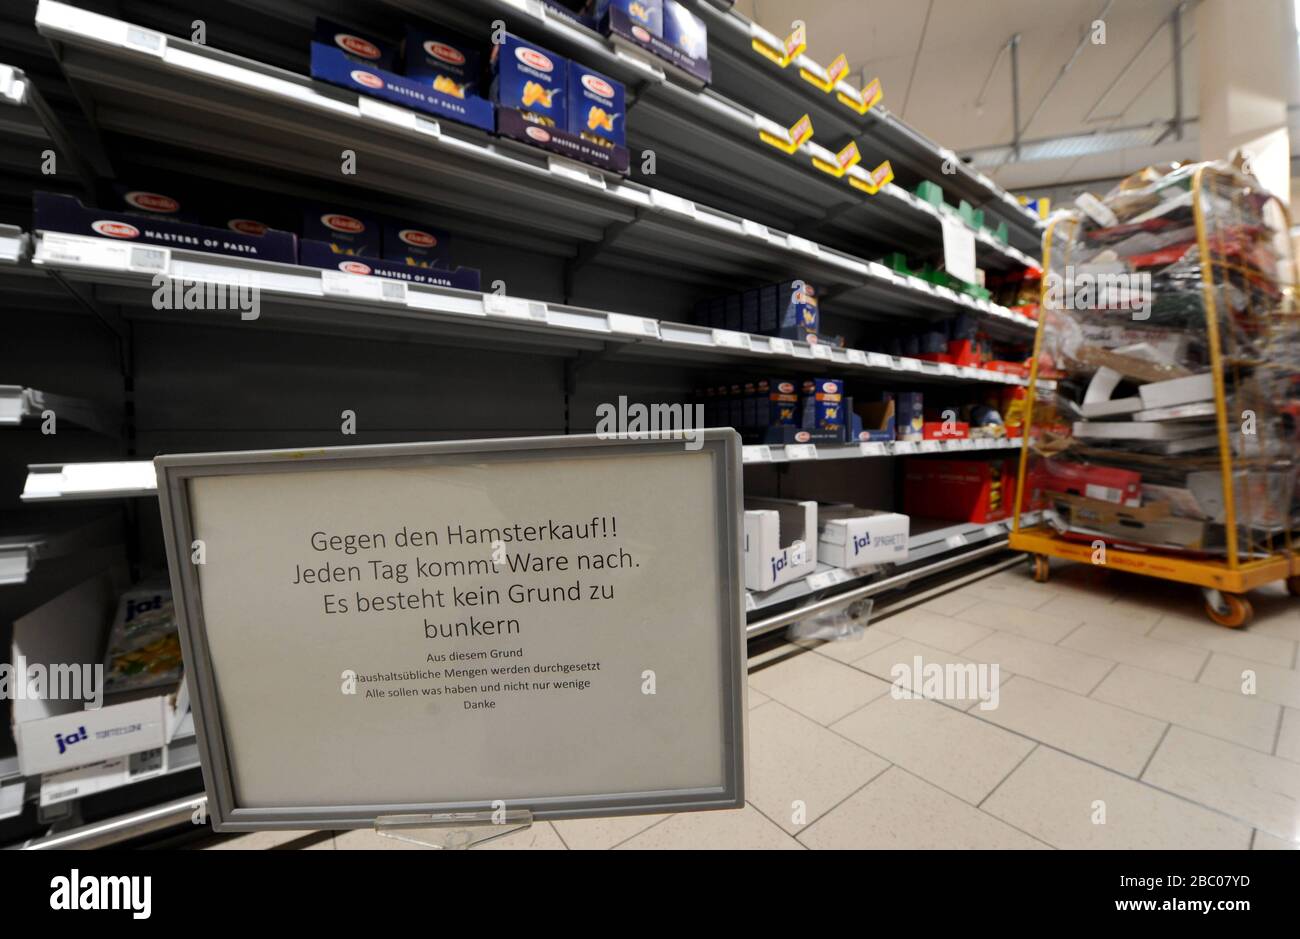 Food shopping in times of the Corona pandemic: in the picture empty shelves of toilet paper and pasta in a branch of the supermarket chain Rewe in Obergiesing. Signs warn against unnecessary hamster purchases, as regular replenishment is guaranteed. [automated translation] Stock Photo